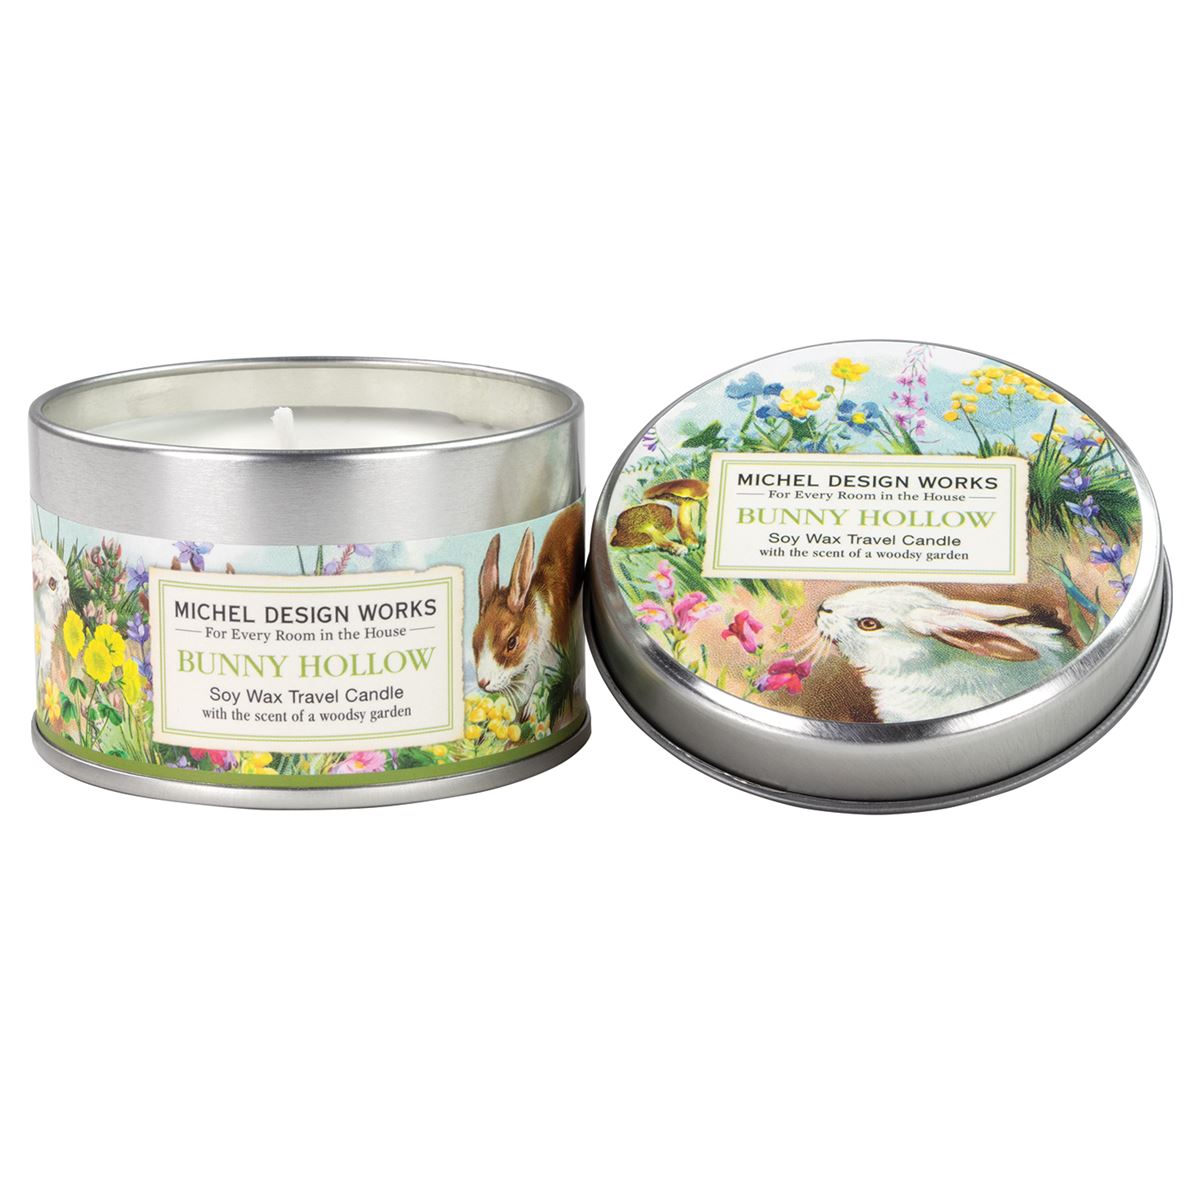 Michel Design Works Travel Tin Candle - 4 oz. - Bunny Hollow